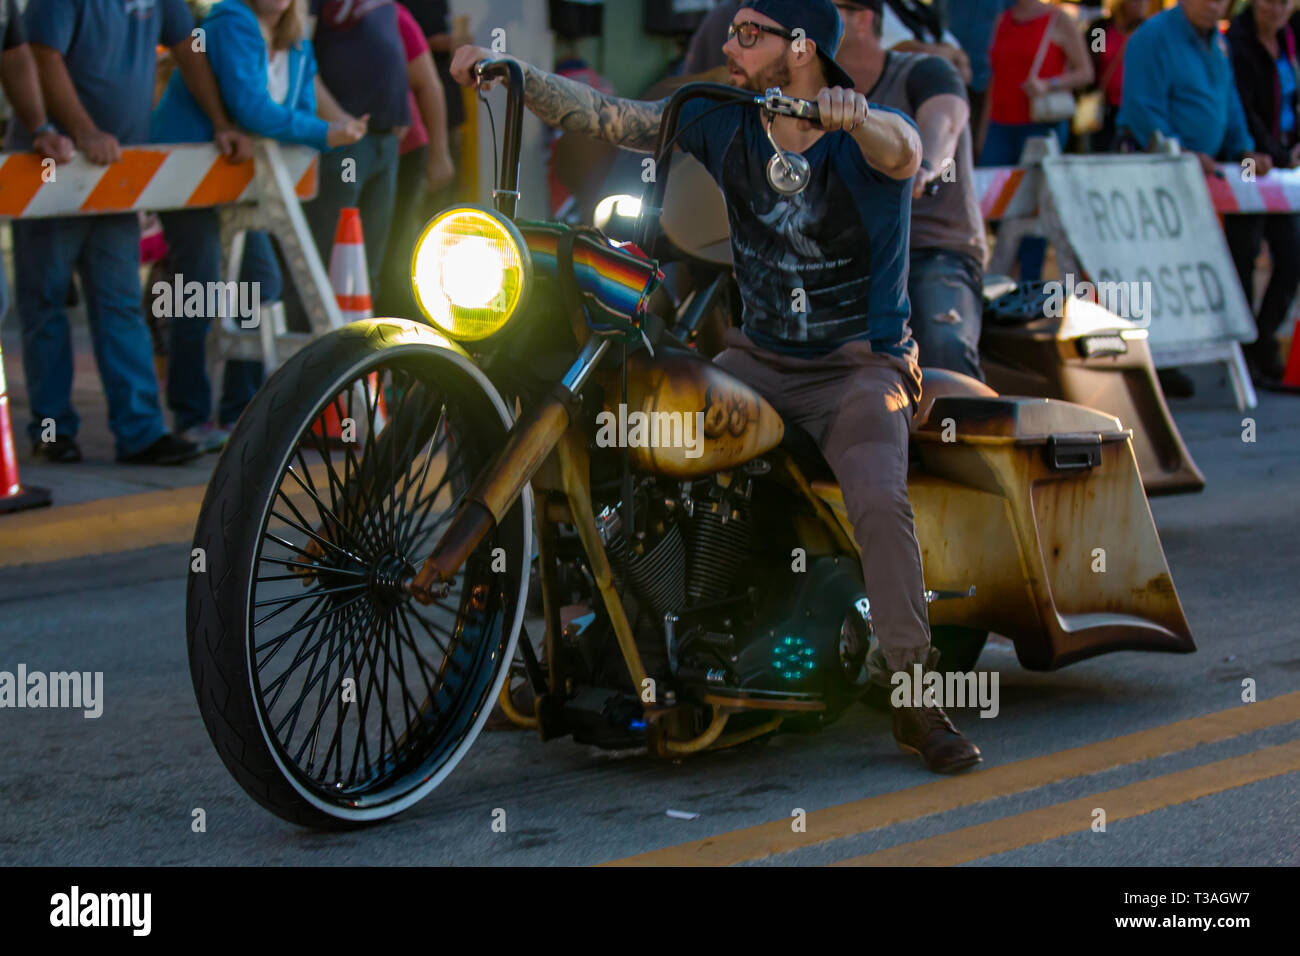 Daytona Beach, FL - 12 March 2016: Biker on customized motorcycle participating in the 75th Annual Bike Week at the World's Most Famous Beach. Stock Photo